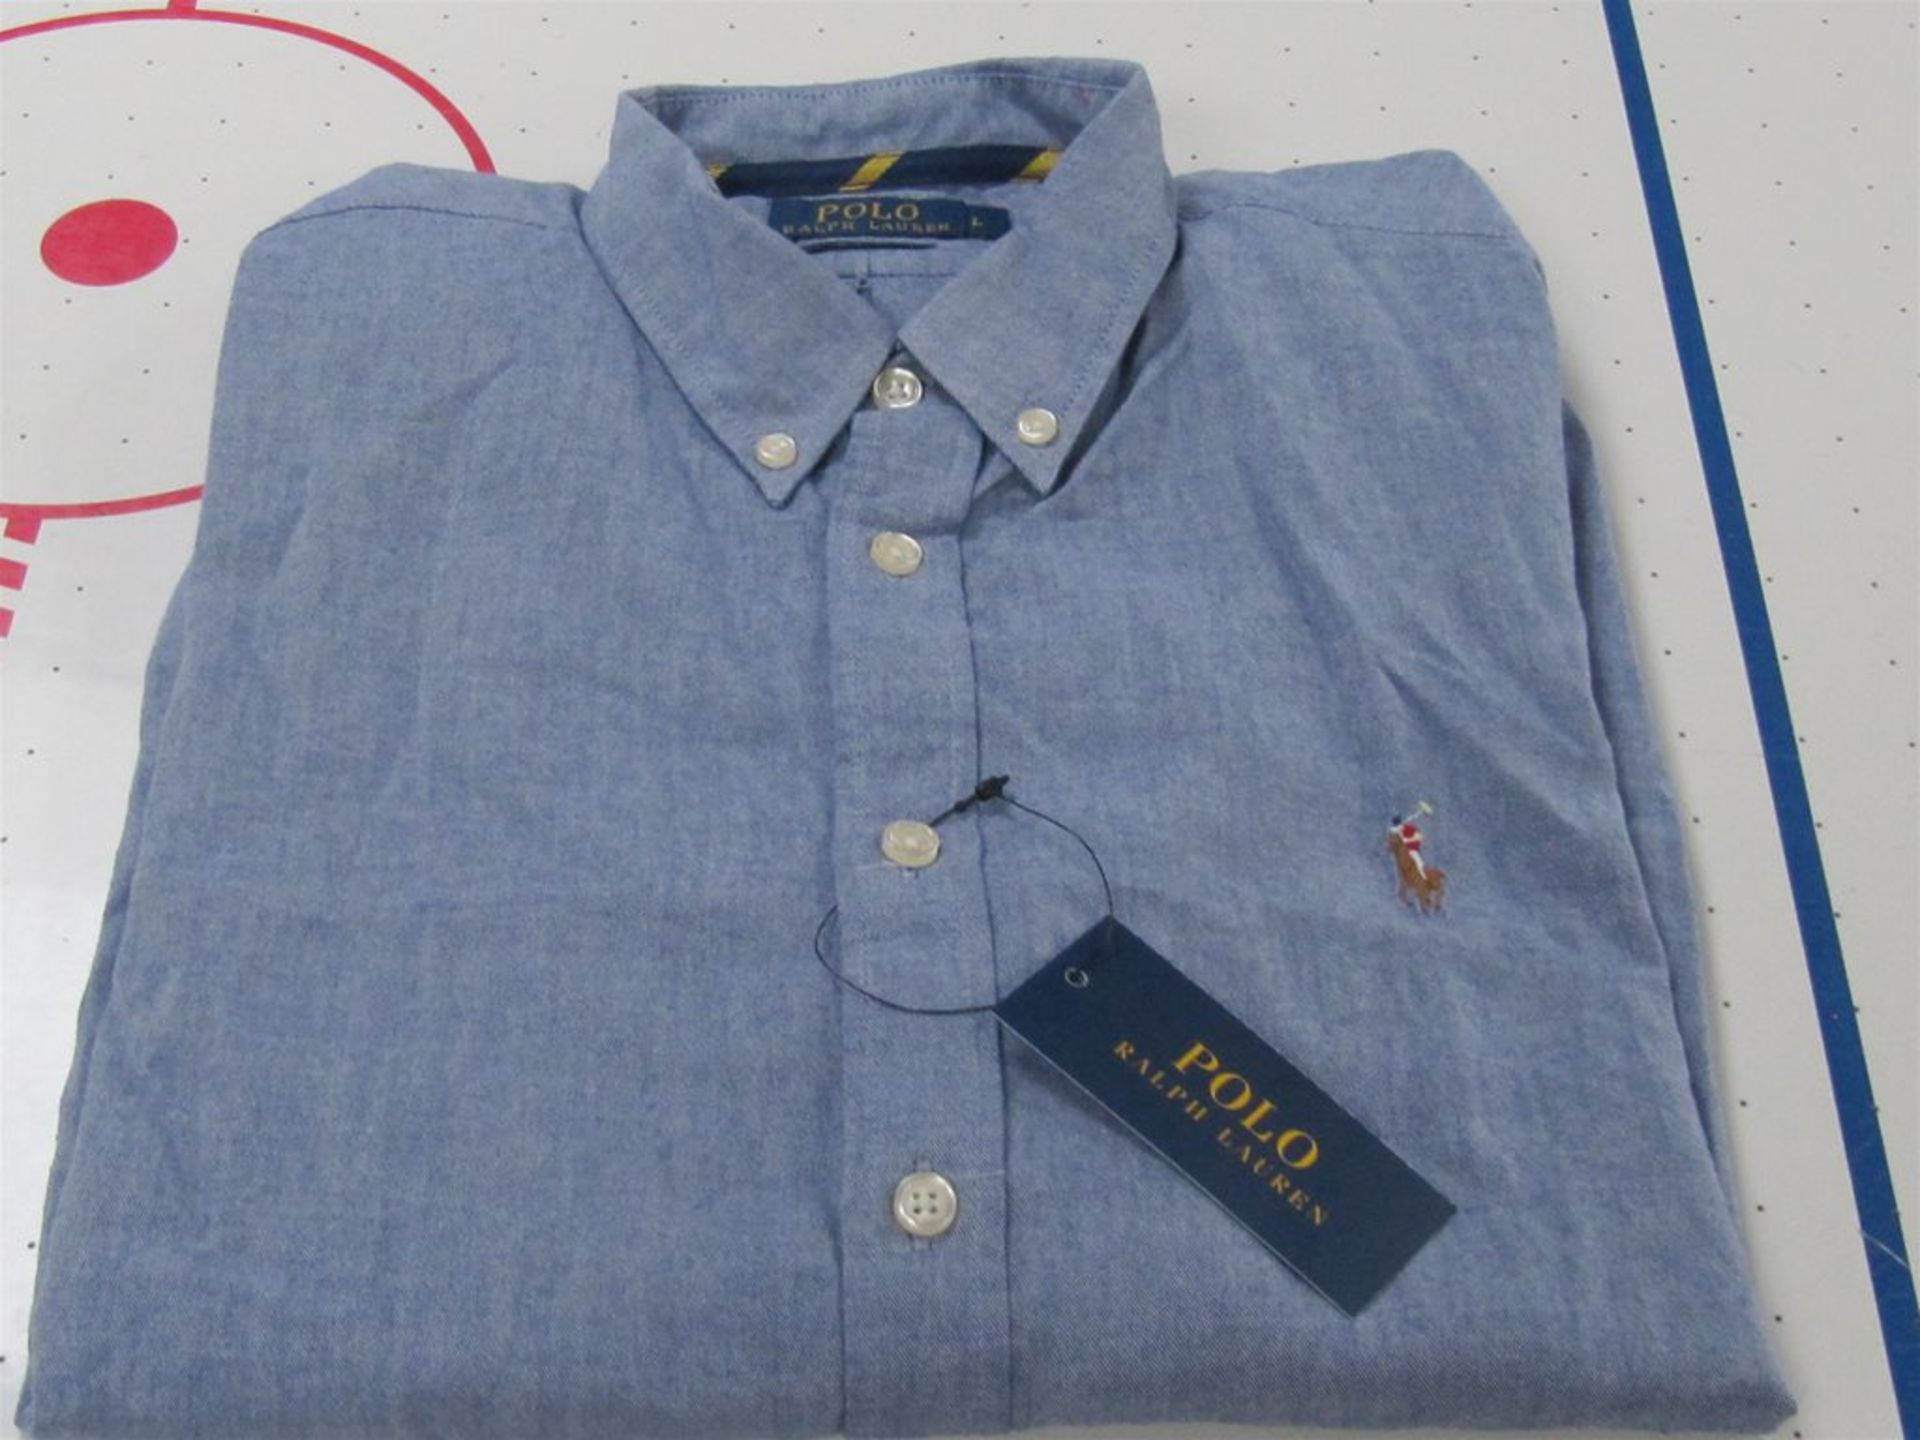 Ralph Lauren BSR Shirt. Blue. Free Shipping when you Win 2 Lots or more.